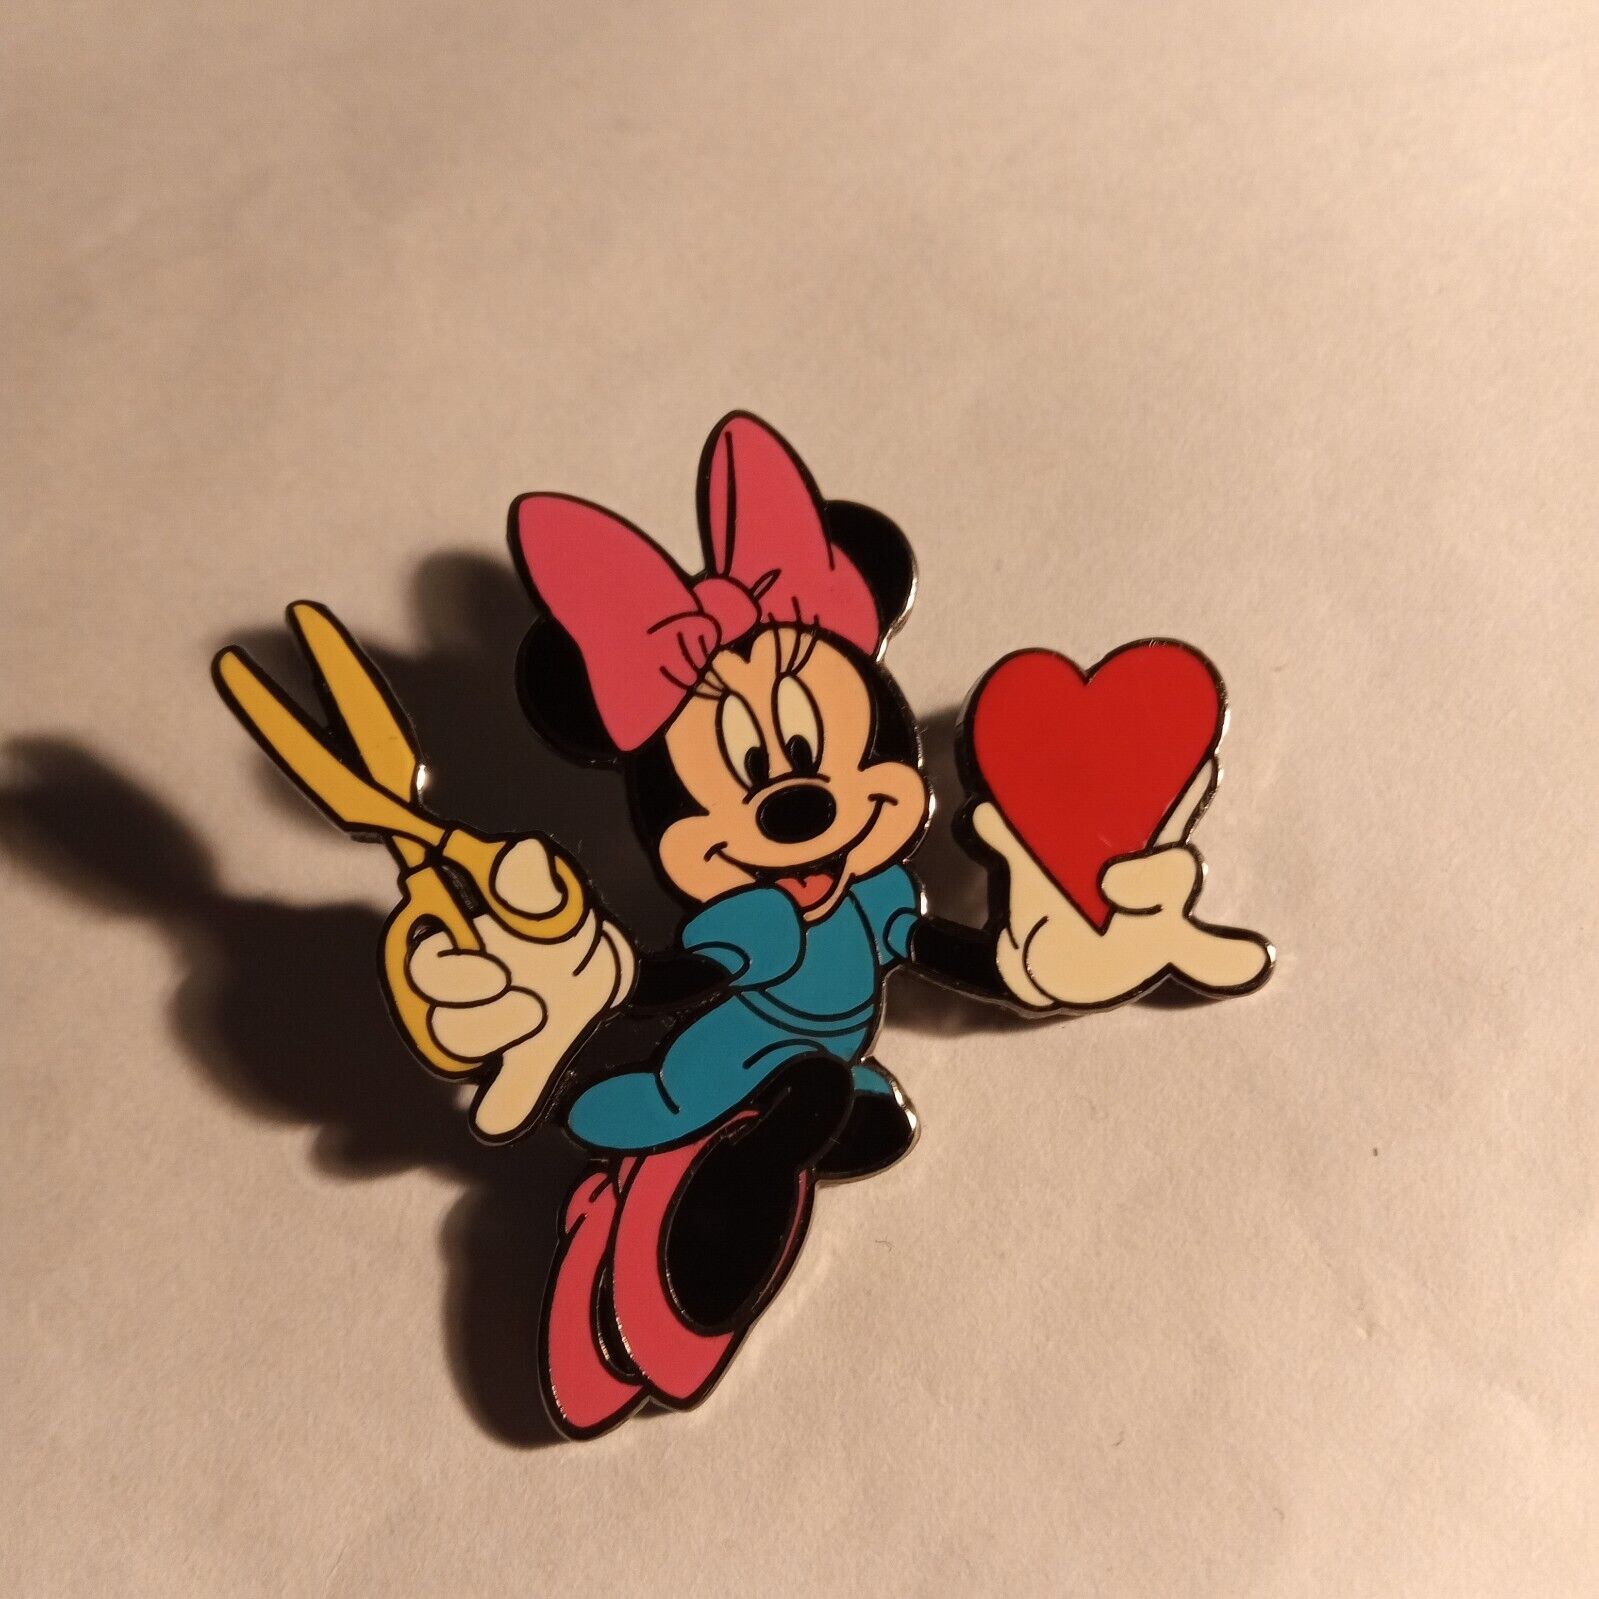 Disney,s 2001 W/Valentine Only Have One LE 2500 Pin 3875